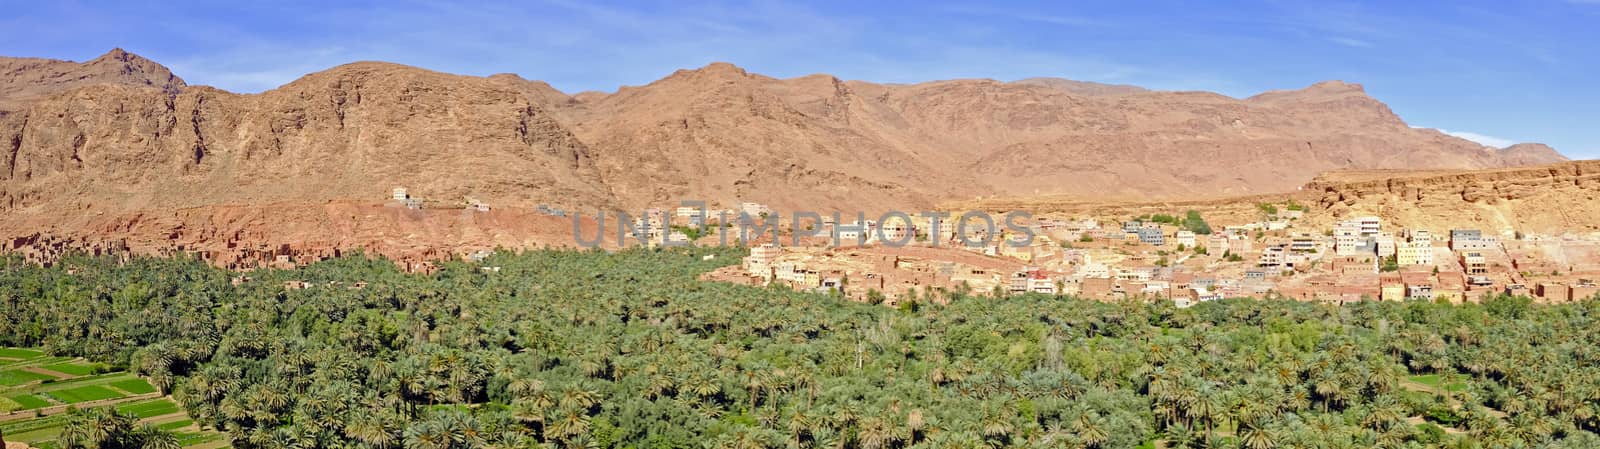 Panorama with oasis and village in the desert in Morocco Africa by devy